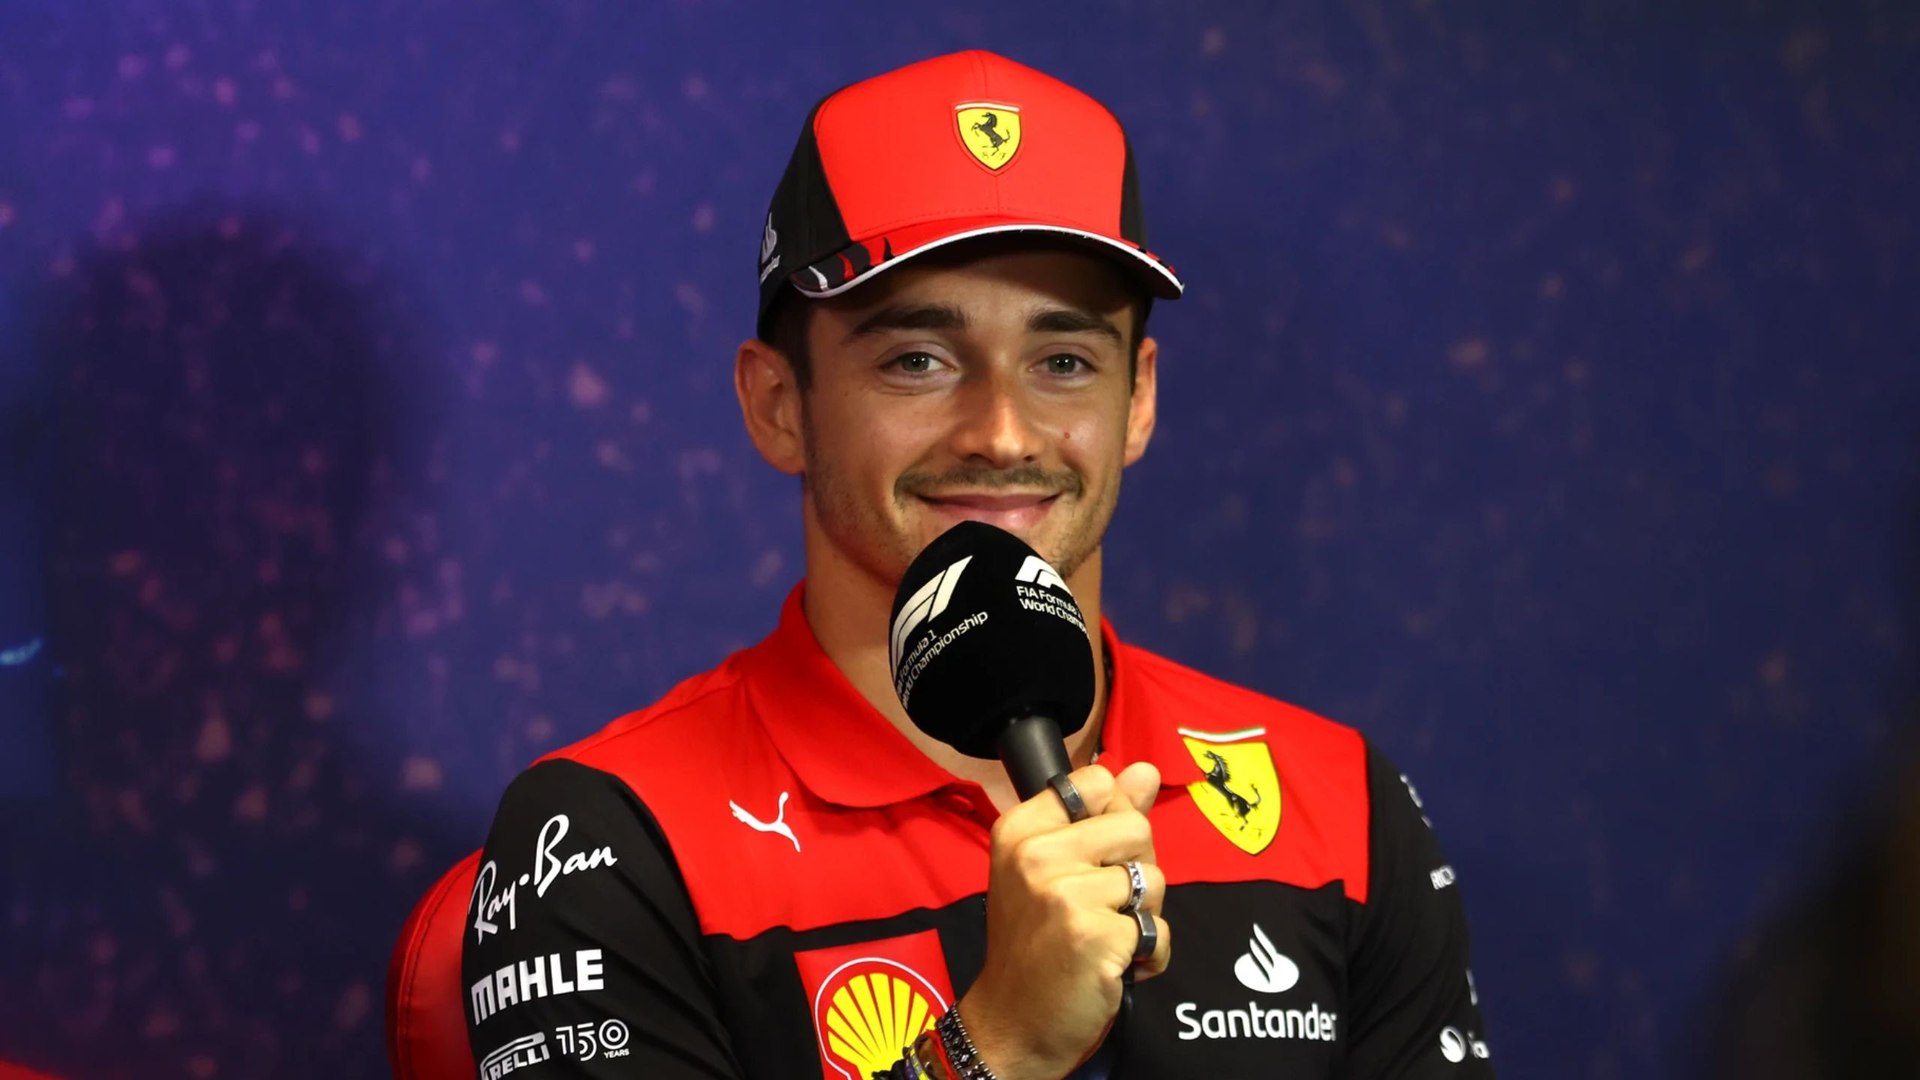 Ampliffy TV in English: Charles Leclerc presents his new helmet design